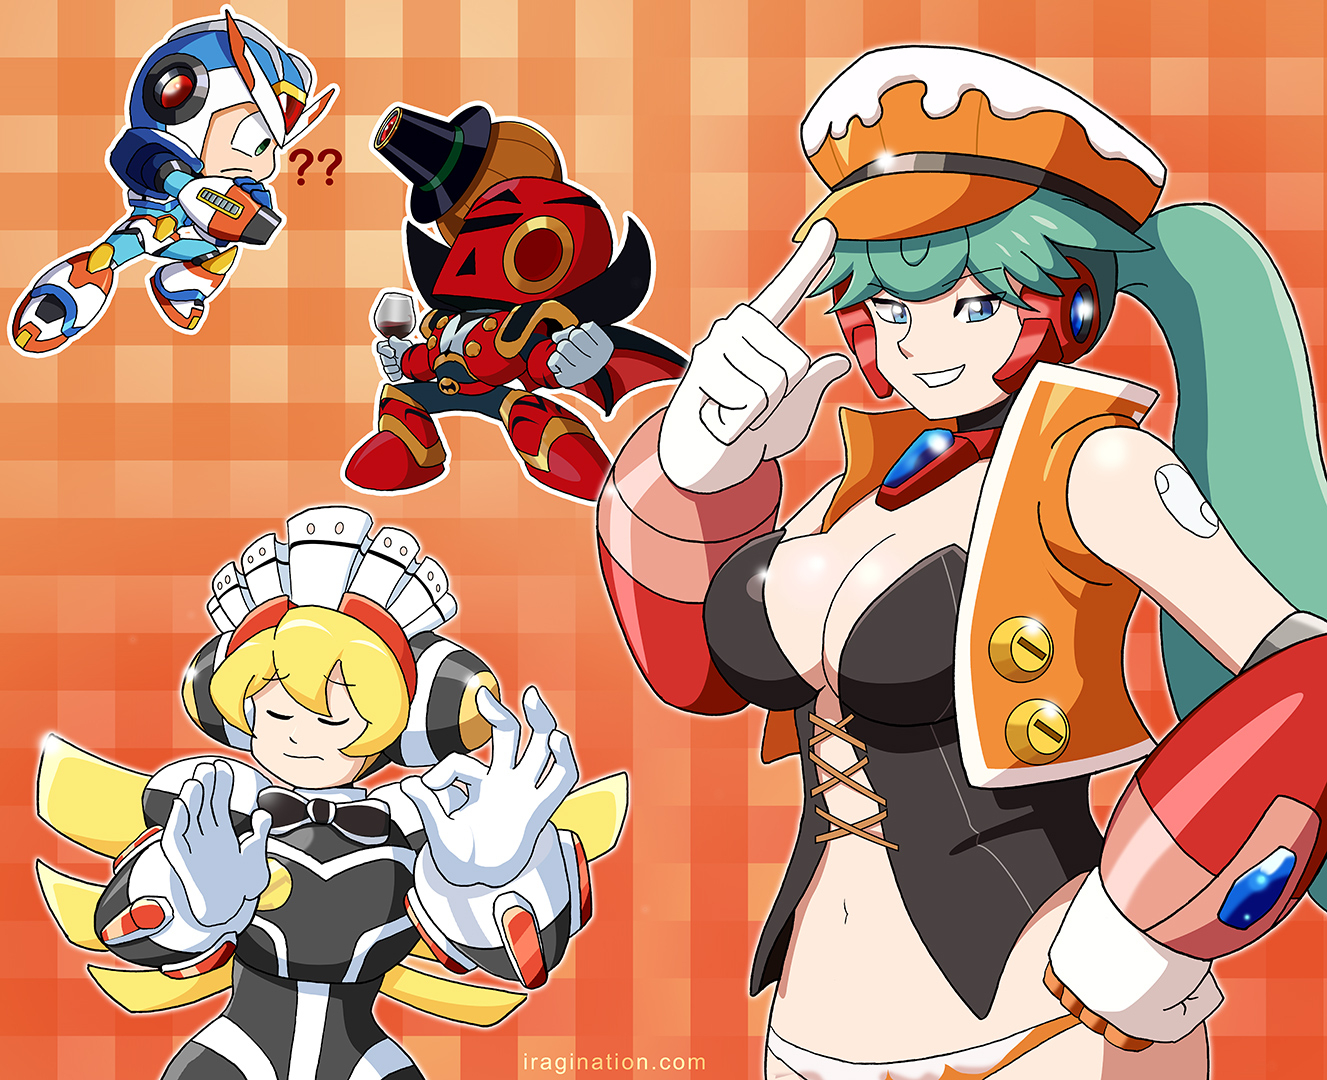 Rockman X DiVE - Halloween Event 2020- When the amount of fanservice is just right
Lots of things going on here. First of all, very little time to put this together appropriately but I tried my best.

I wanted to do something when the [url=https://www.facebook.com/CAPCOM.RXD/videos/2856472984585478]Third Armor[/url] was announced for Rockman X DiVE a few weeks ago. This armor is special for me since it is the last character I added to [url=https://www.iragination.com/2019/12/16/bass-abyss-1-0-9-mega-man-x-third-armor/]Bass Abyss[/url] last year. In the end, I could not finish anything or decided to focus on something else.

Then the Rockman X Dive team announced [url=https://www.facebook.com/CAPCOM.RXD/posts/637845700244856]Halloween Vile and Halloween Marino[/url]. Add in Iron Maiden Cinnamon, and I got this.

Third Armor vs Halloween Vile. Hopefully, you have recognized this pose from the Mega Man X5 opening. Vile's first appearance as an S character is not exactly what I expected. His Halloween look is so wacky that I decided to go full parody of that epic scene. Even X is dumbfounded by Vile's look.

Marino of course looks incredible. One has to wonder if we'd get to see these kinds of insights on Reploid anatomy in future mainline games. I know it is good fun for the team and anything goes, so I can join in the fun too.

So does [url=https://www.facebook.com/CAPCOM.RXD/posts/630616294301130]Iron Maiden Cinnamon[/url] who also was released recently. She definitely approves of Marino's design! Her gesture? Yep. It's a reference to some fragment of internet culture aka memes.

Keywords: marino cinnamon vile x